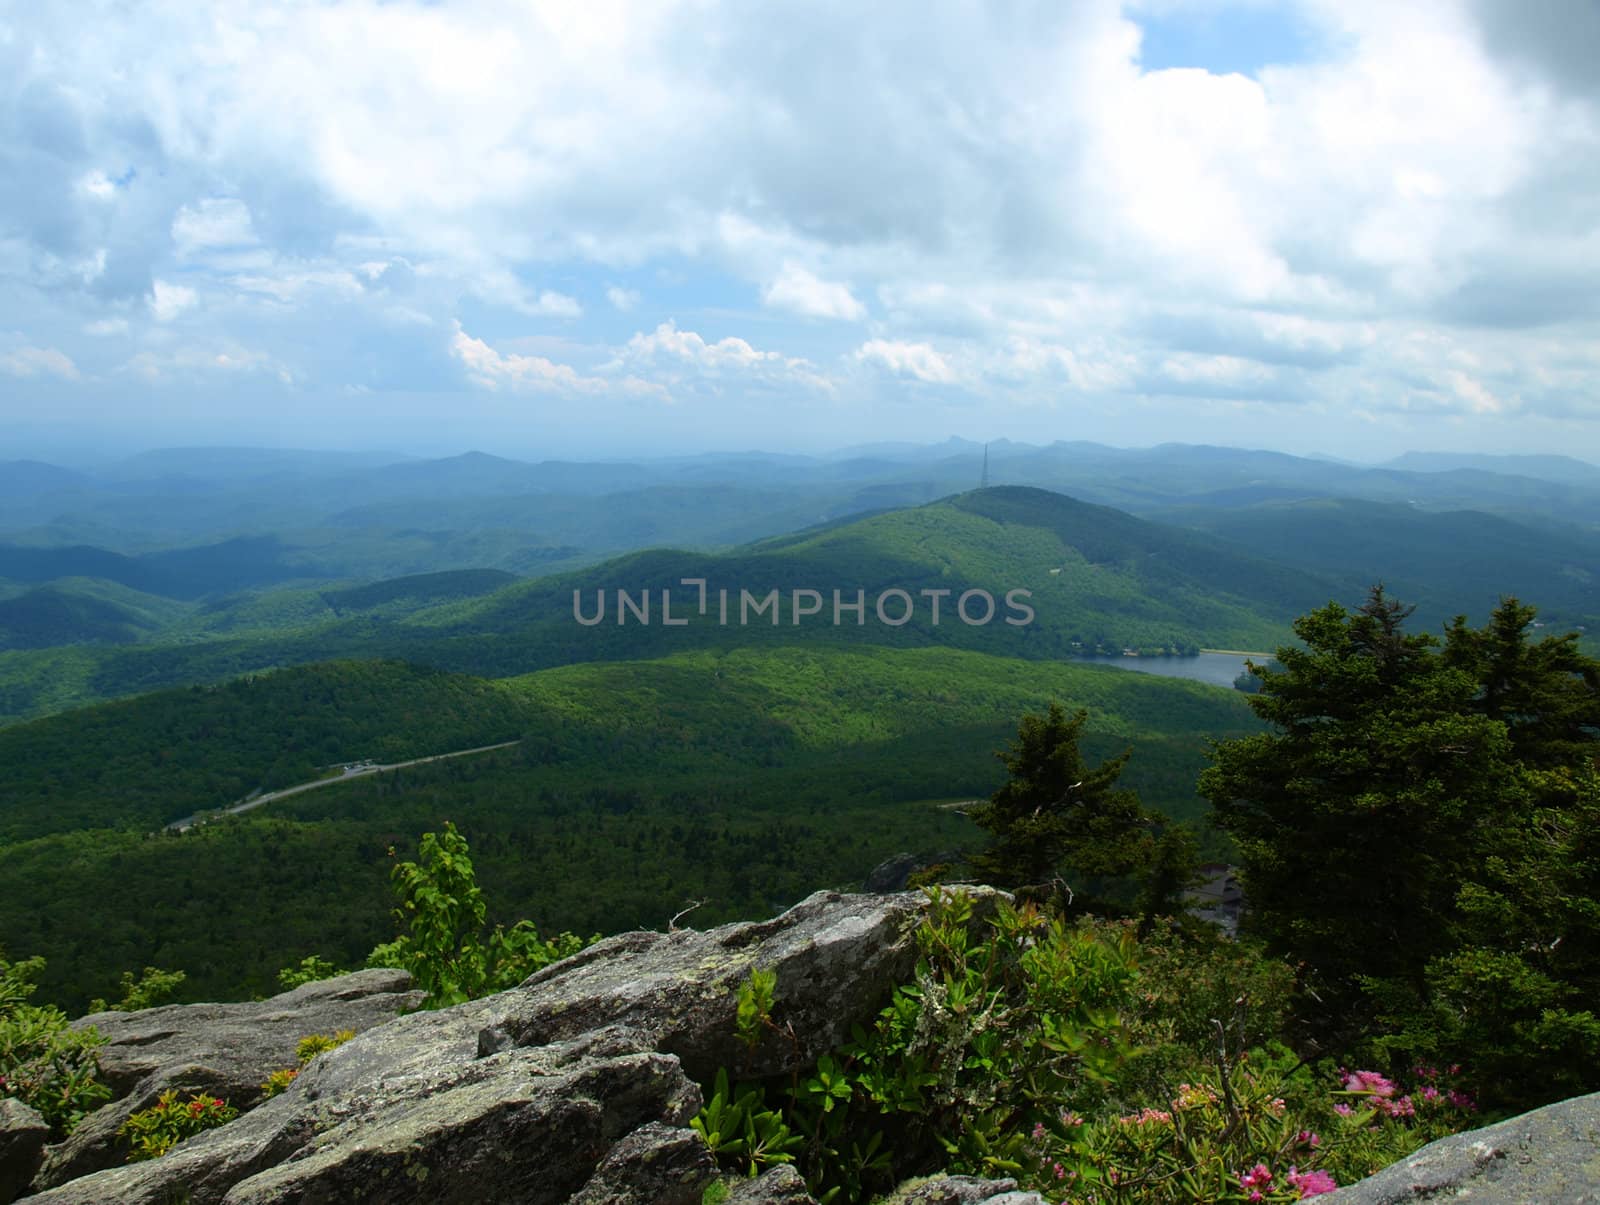 View seen from Grandfather Mountain Sate Park in North Carolina